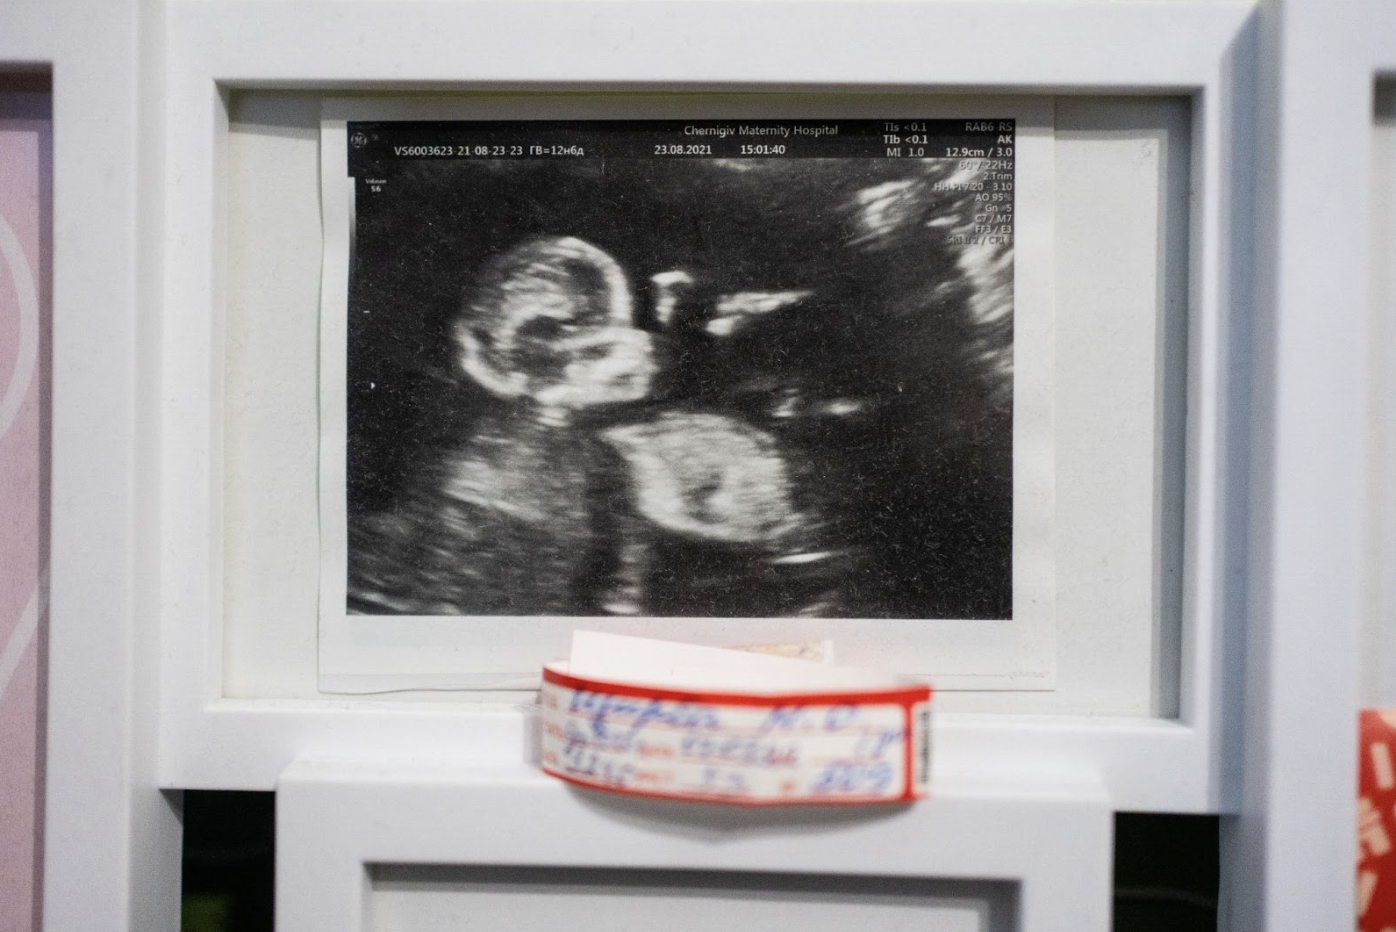 Ultrasound screen shows an unborn baby.